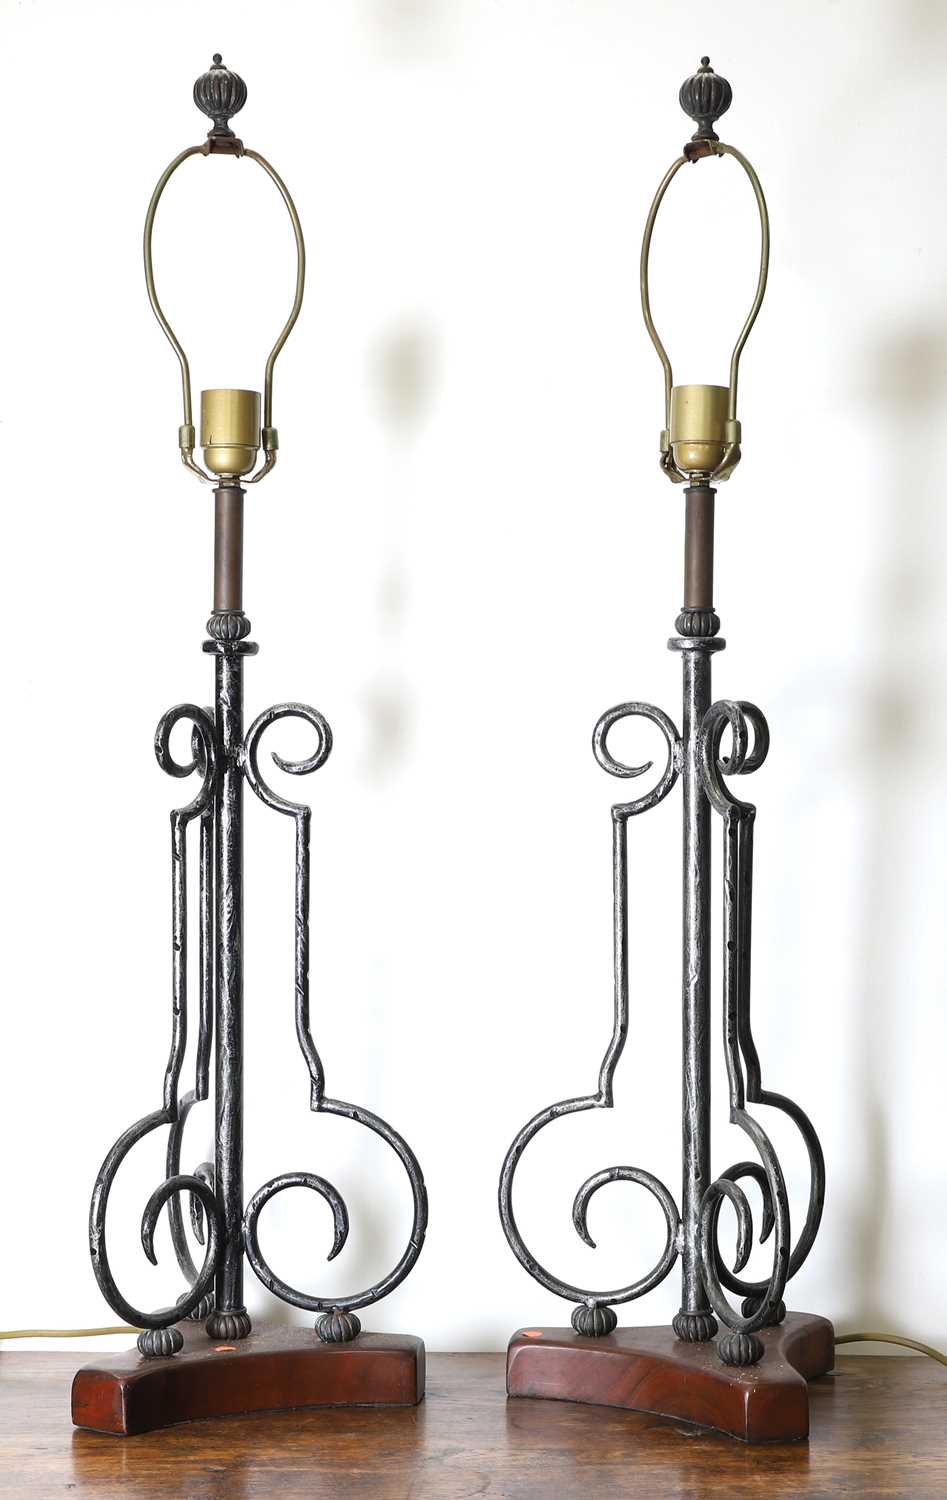 A wrought and cast metal four-arm candle wall sconce, - Image 2 of 5